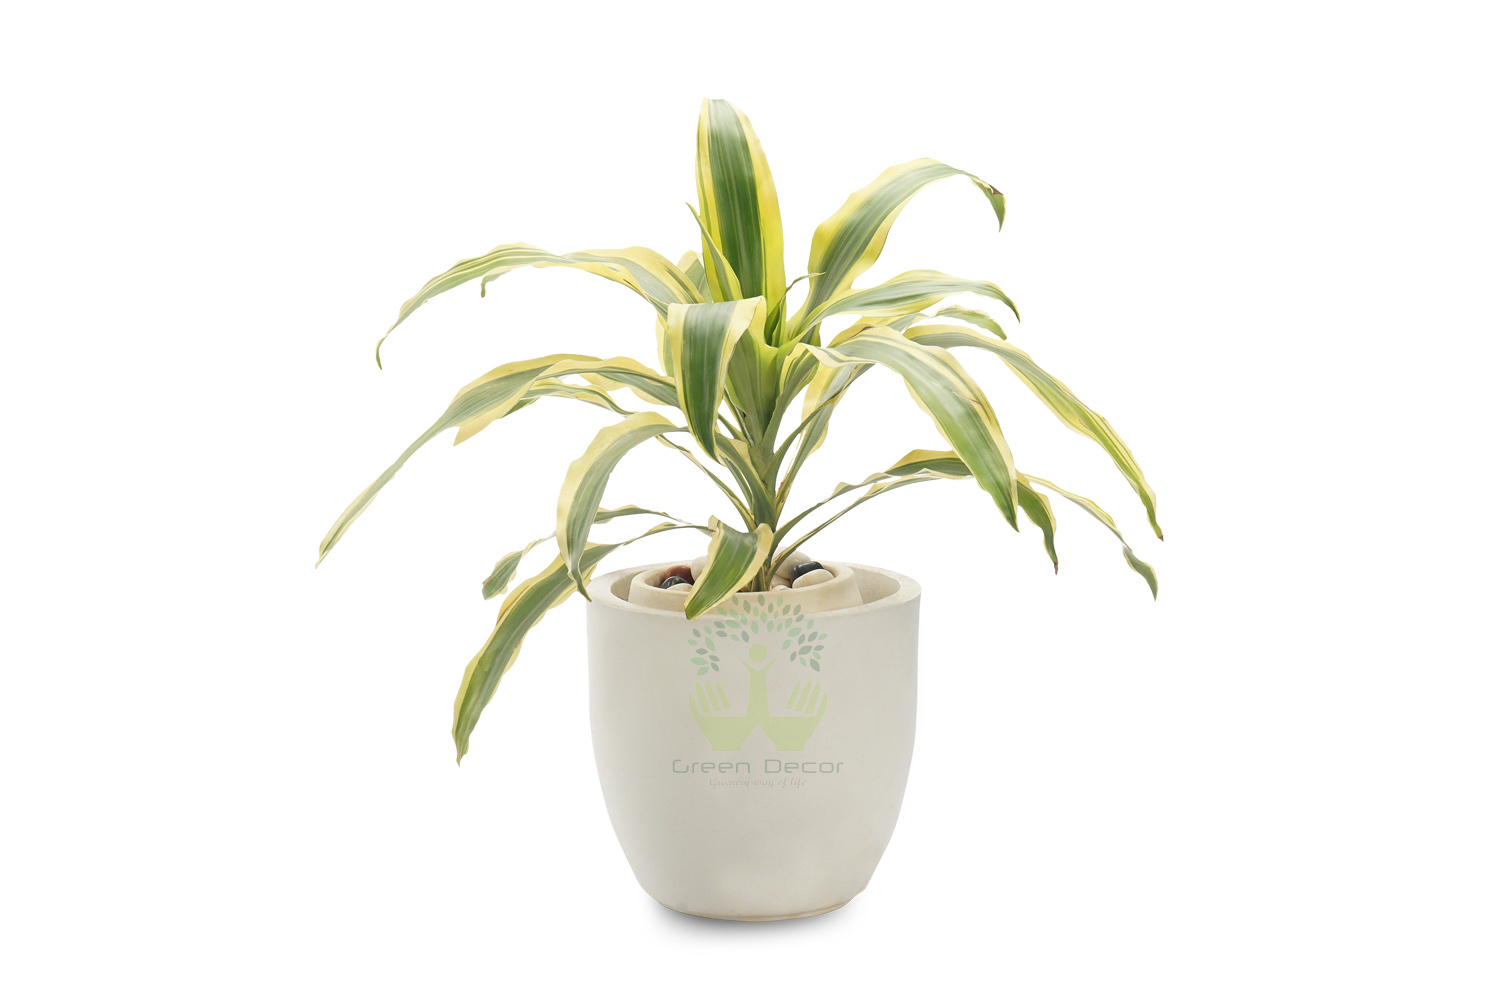 Buy Dracaena victoria Plants , White Pots and seeds in Delhi NCR by the best online nursery shop Greendecor.